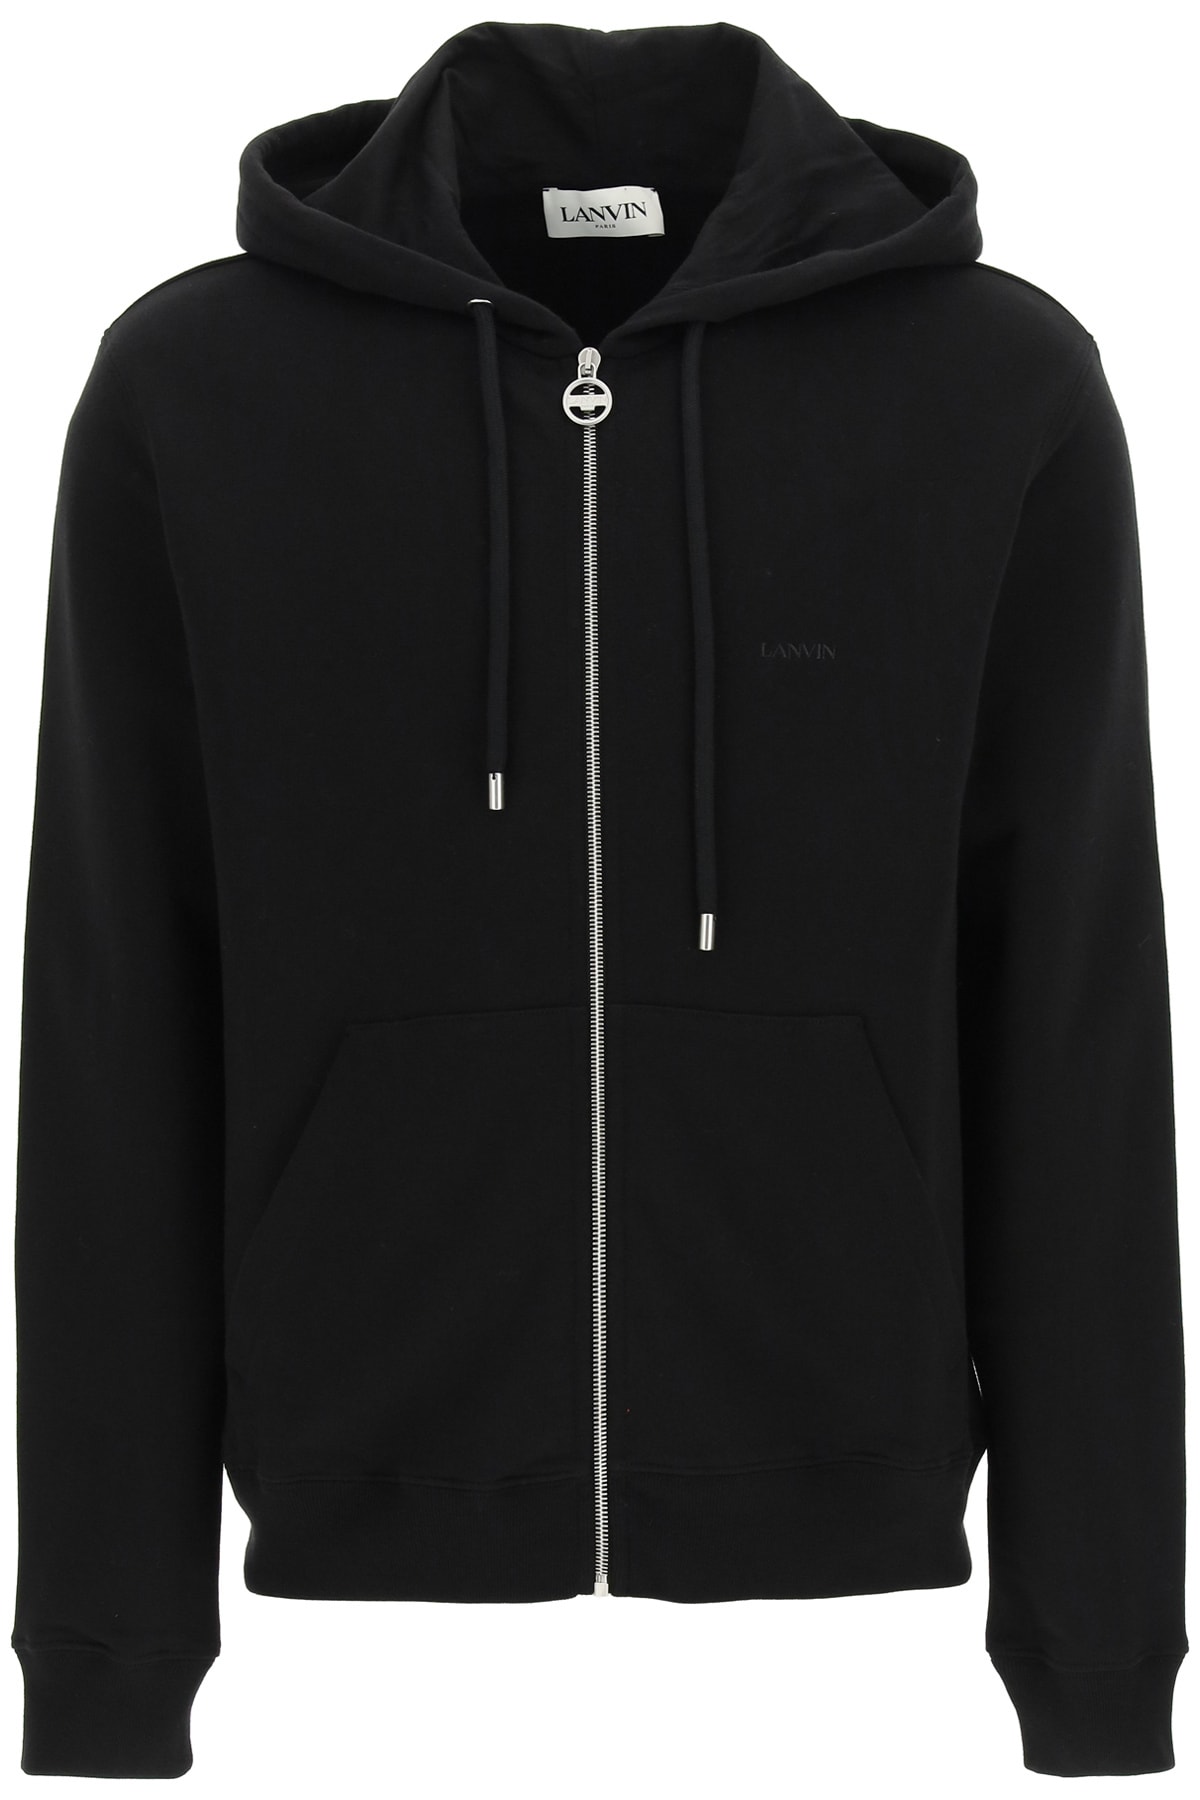 Lanvin Sweatshirt With Hoodie And Embroidered Logo